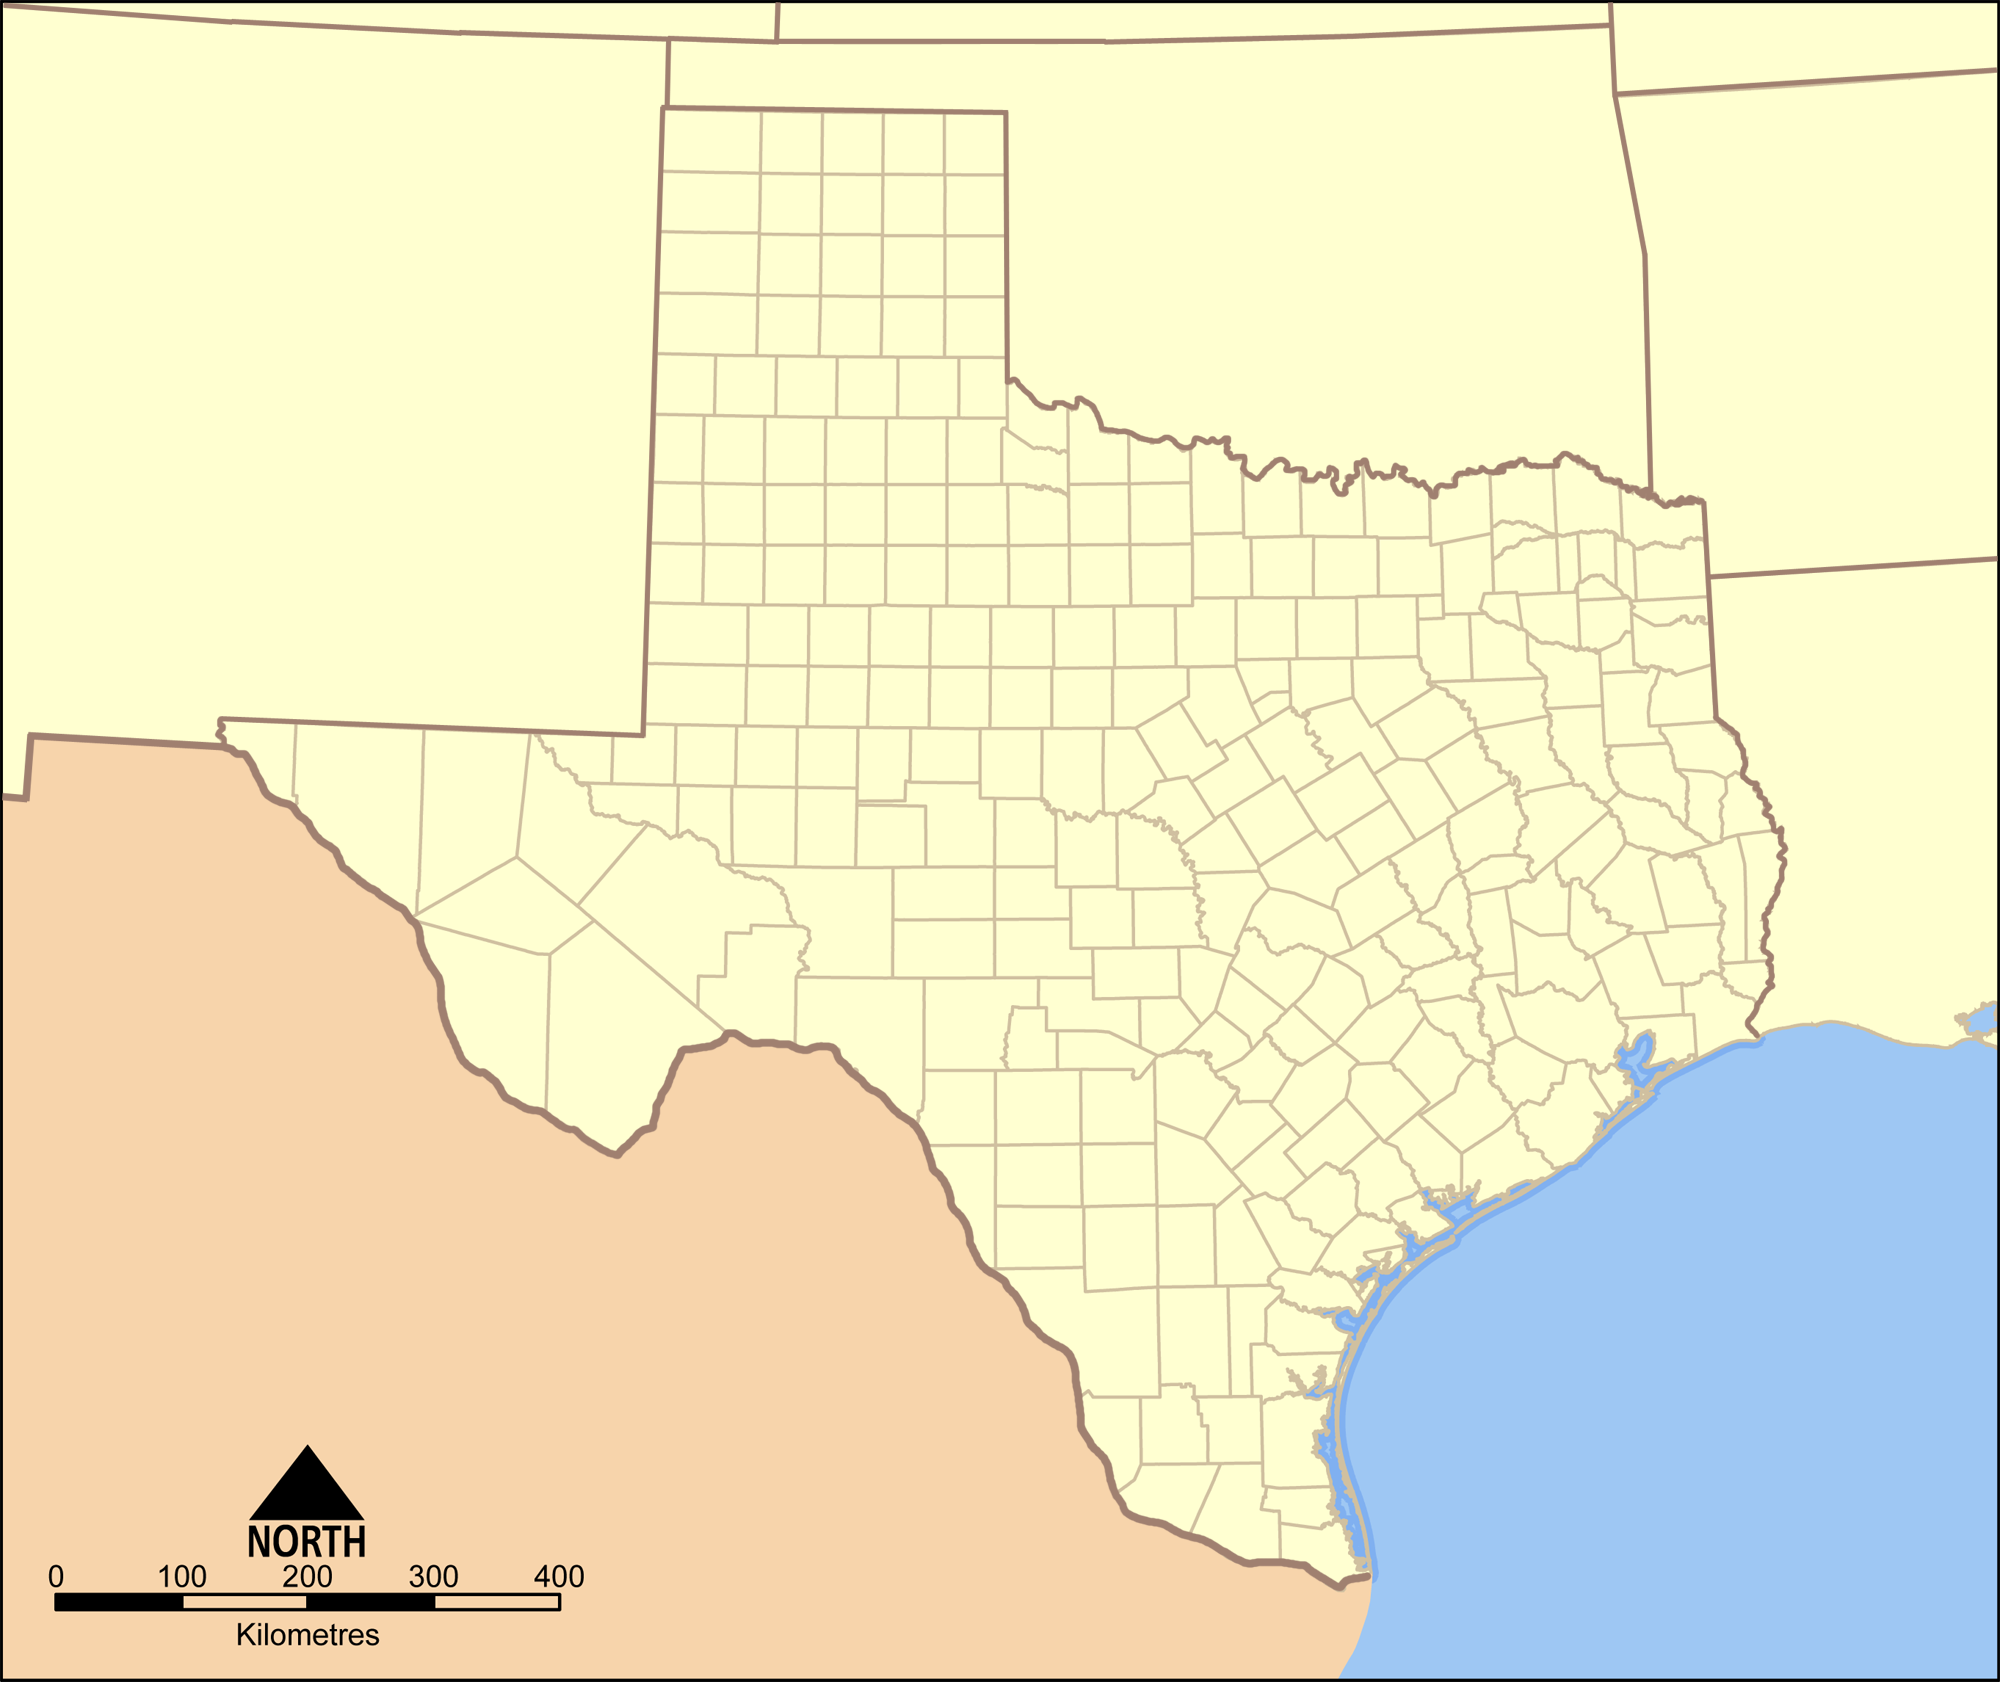 Texas Map With Counties